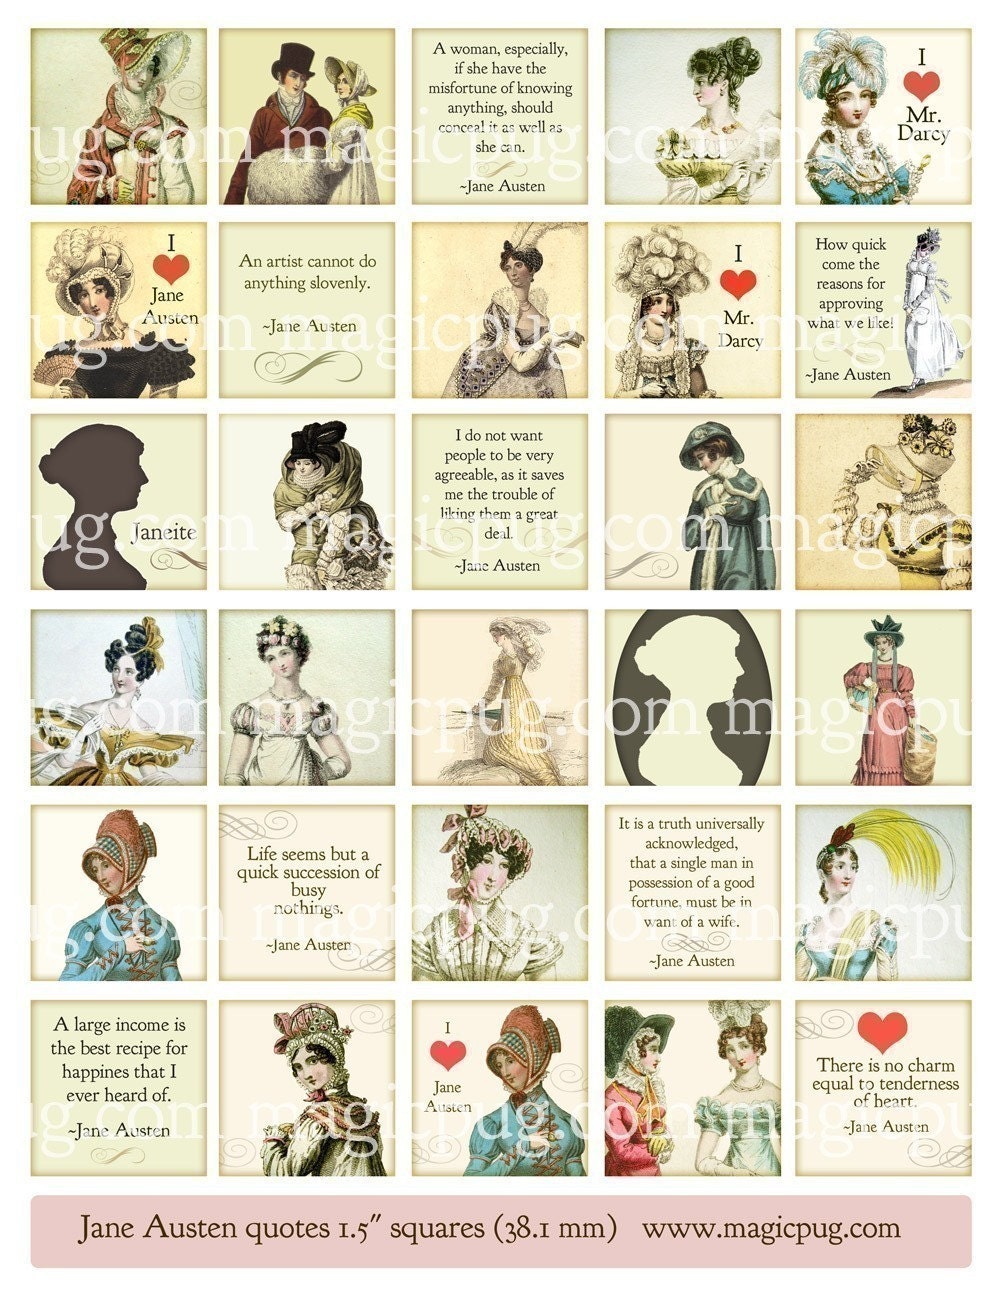 quotes about writing. Quotes On Writing. jane austen quotes on writing; jane austen quotes on writing. xpsm1730. Aug 8, 07:14 AM. I#39;m looking for a good dock that I can use my